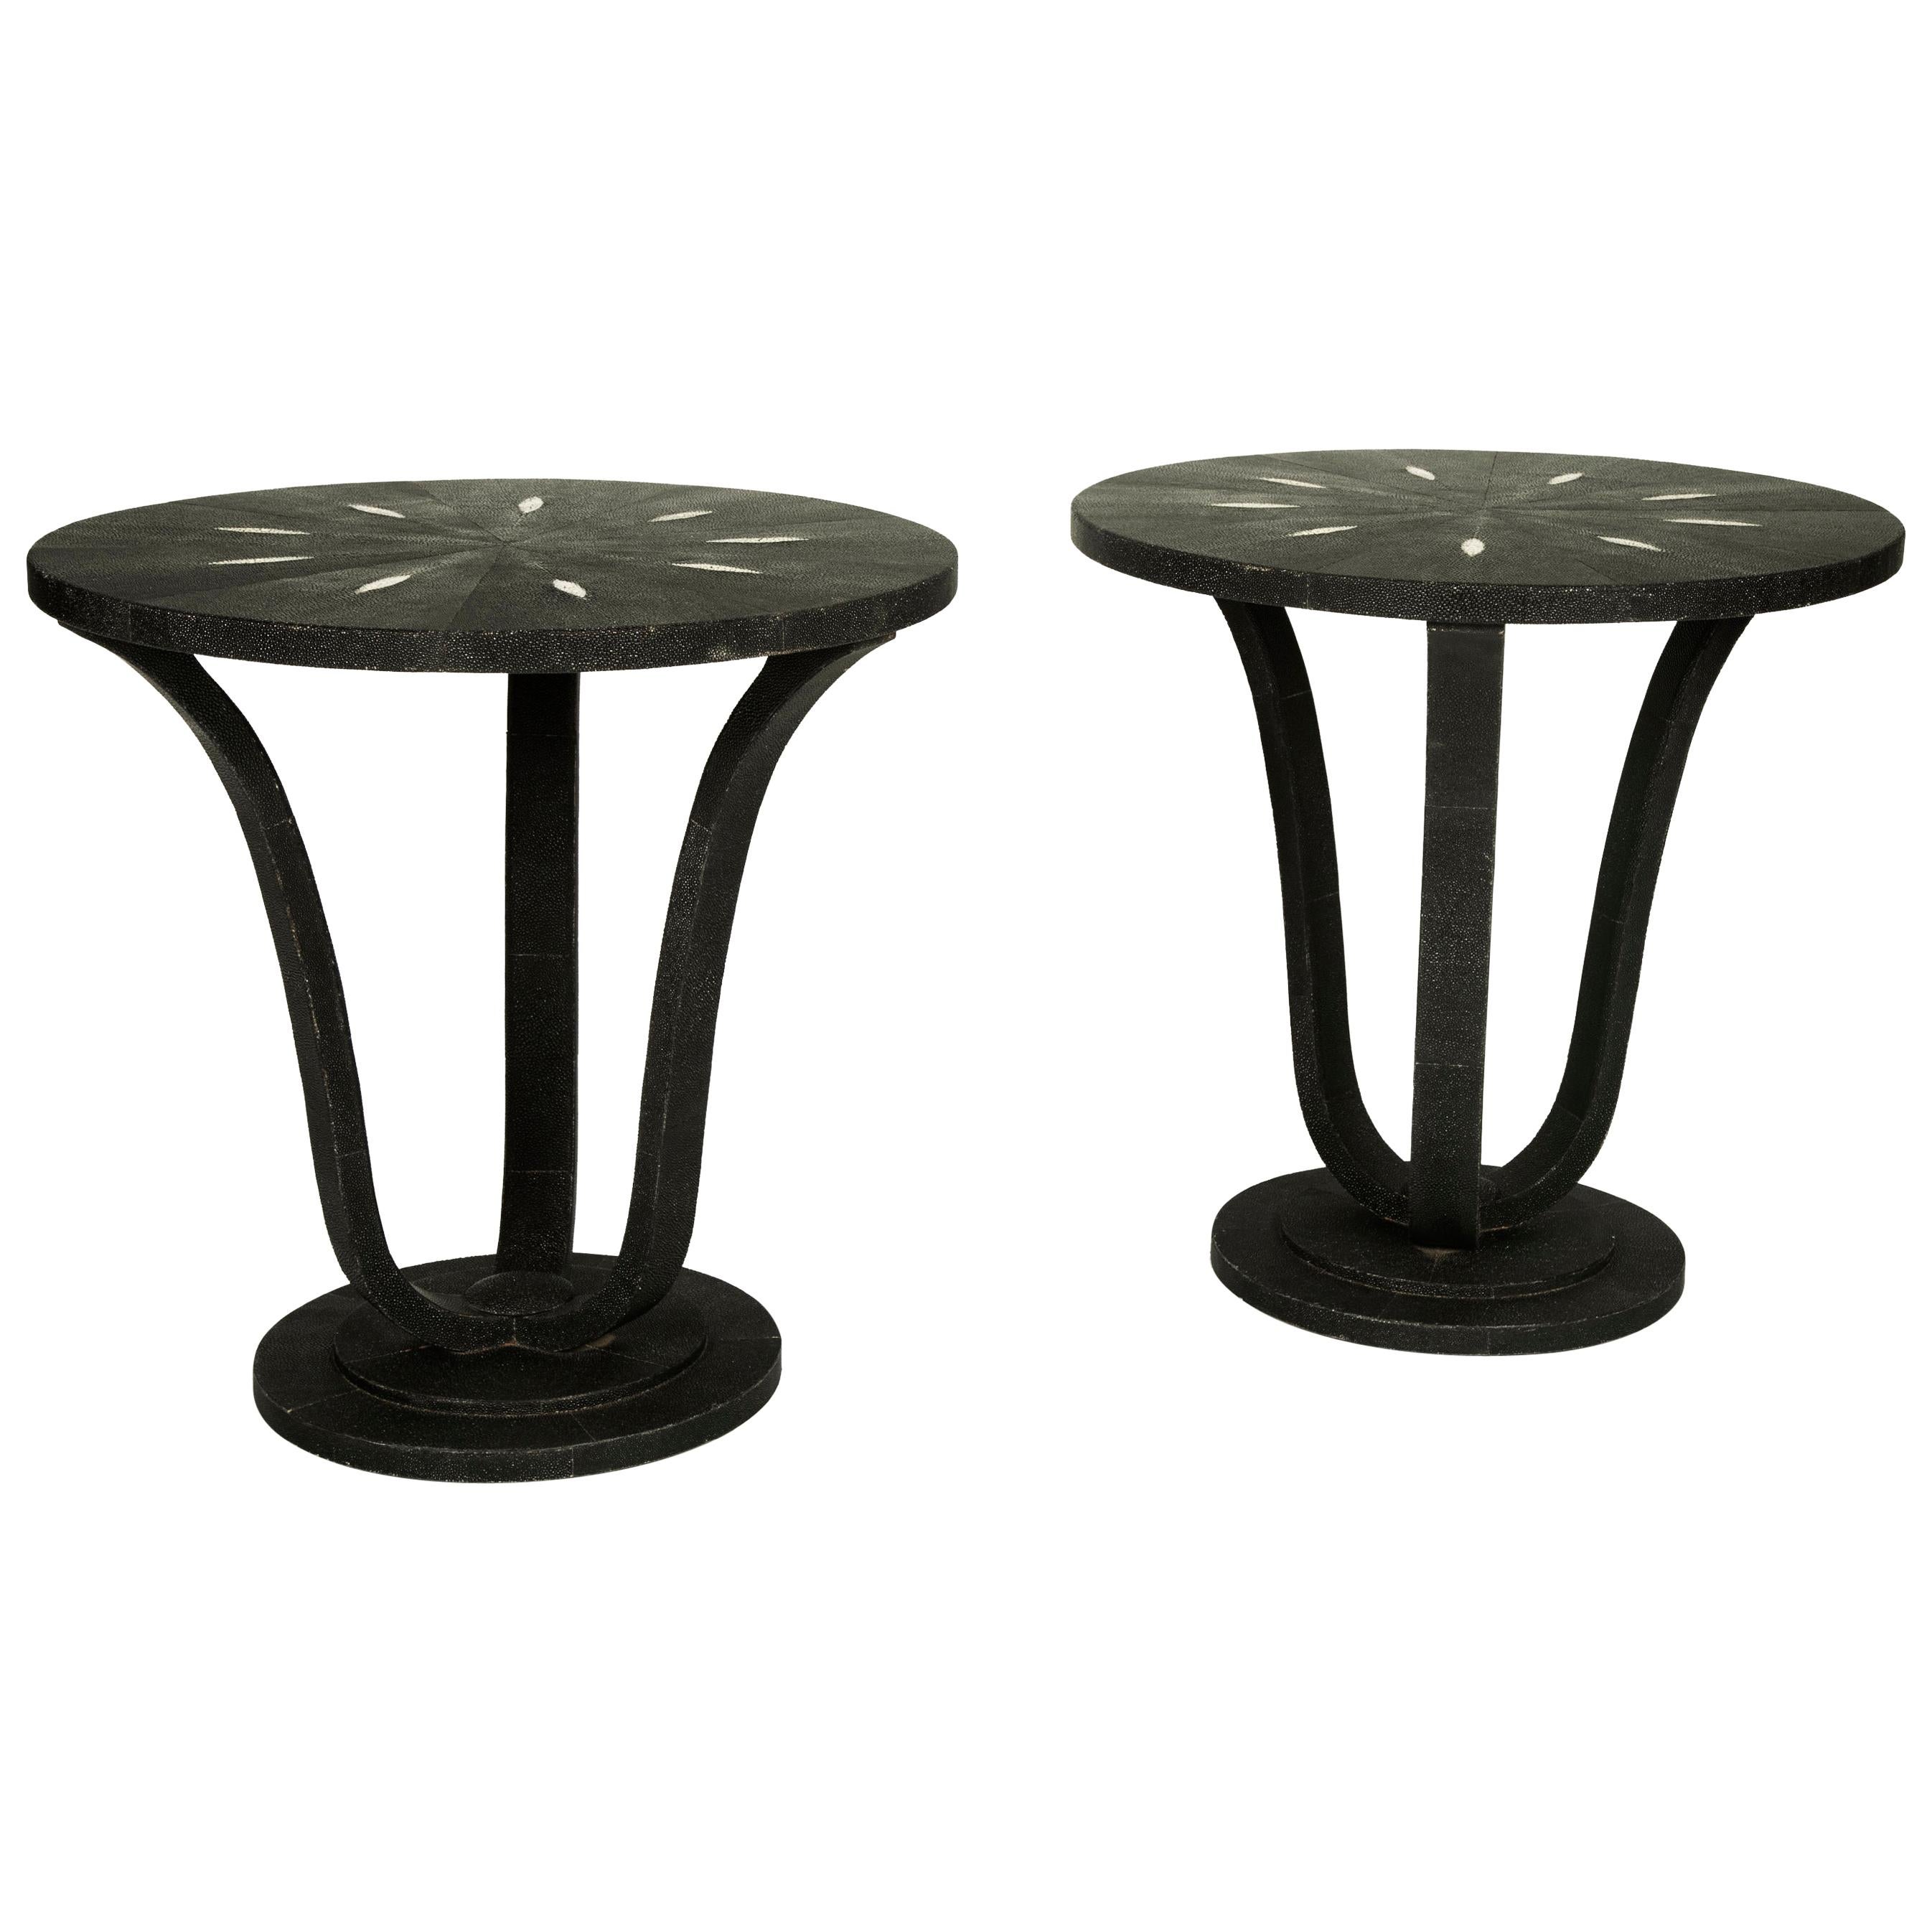 Pair of English Black Shagreen Side Tables, Sold Individually